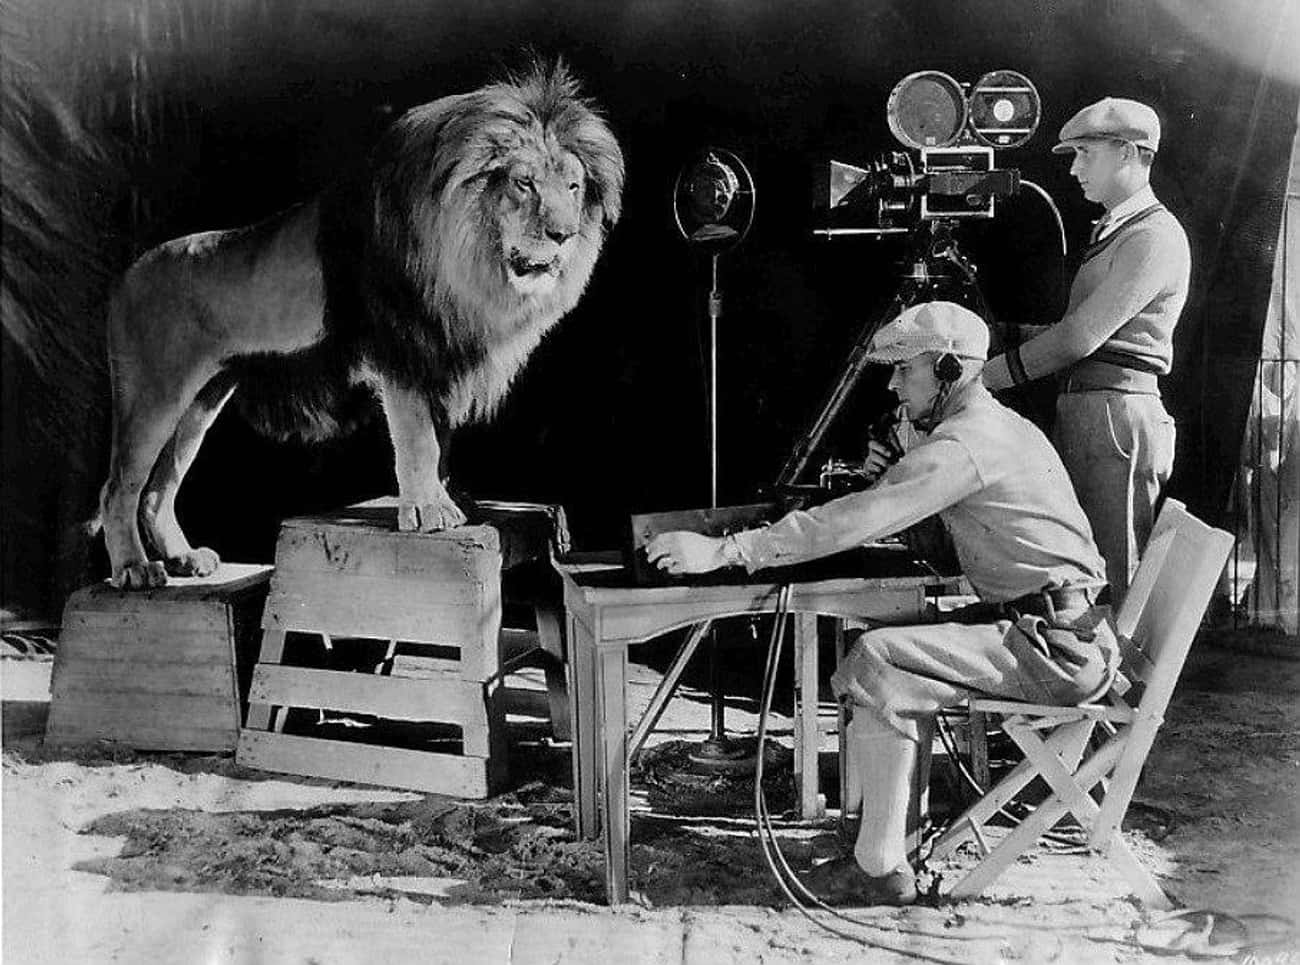 The Actual MGM Lion Being Filmed